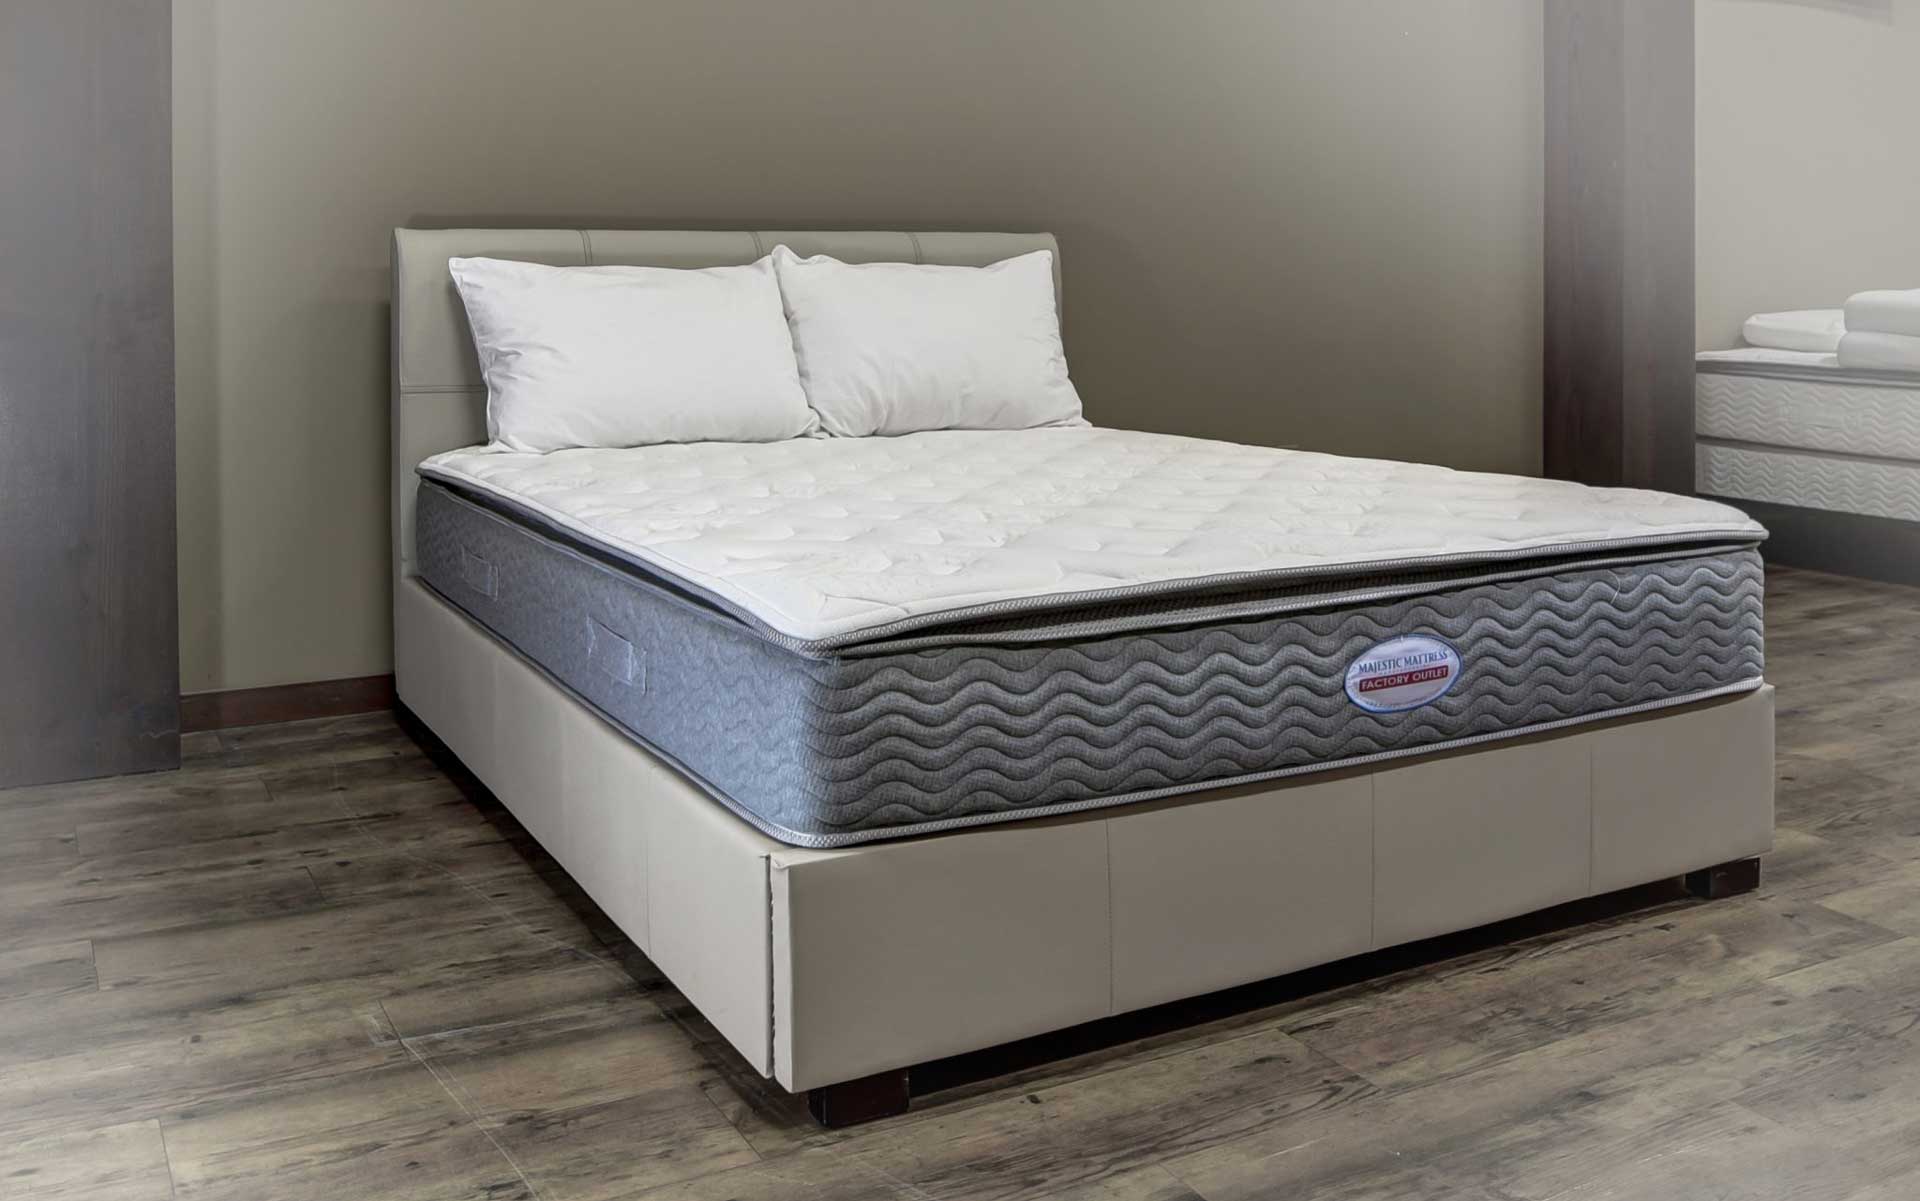 Find Mattresses in Gilroy California